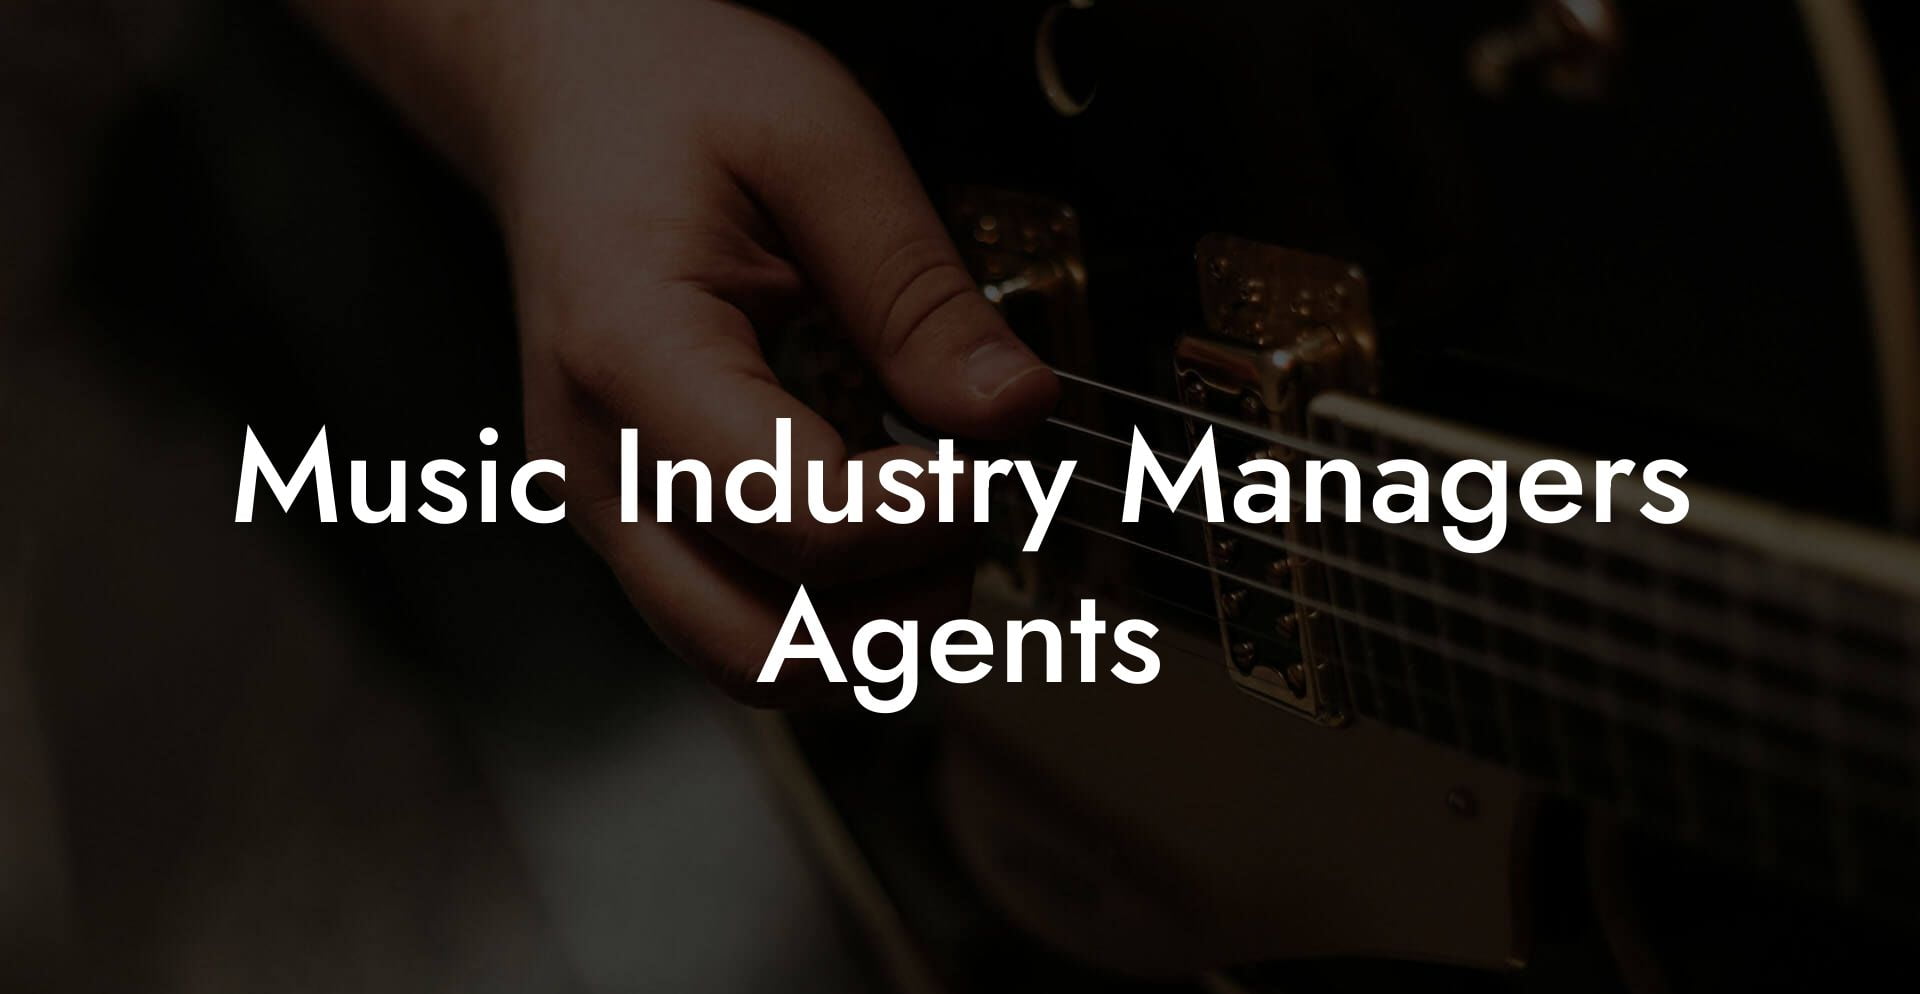 Music Industry Managers Agents